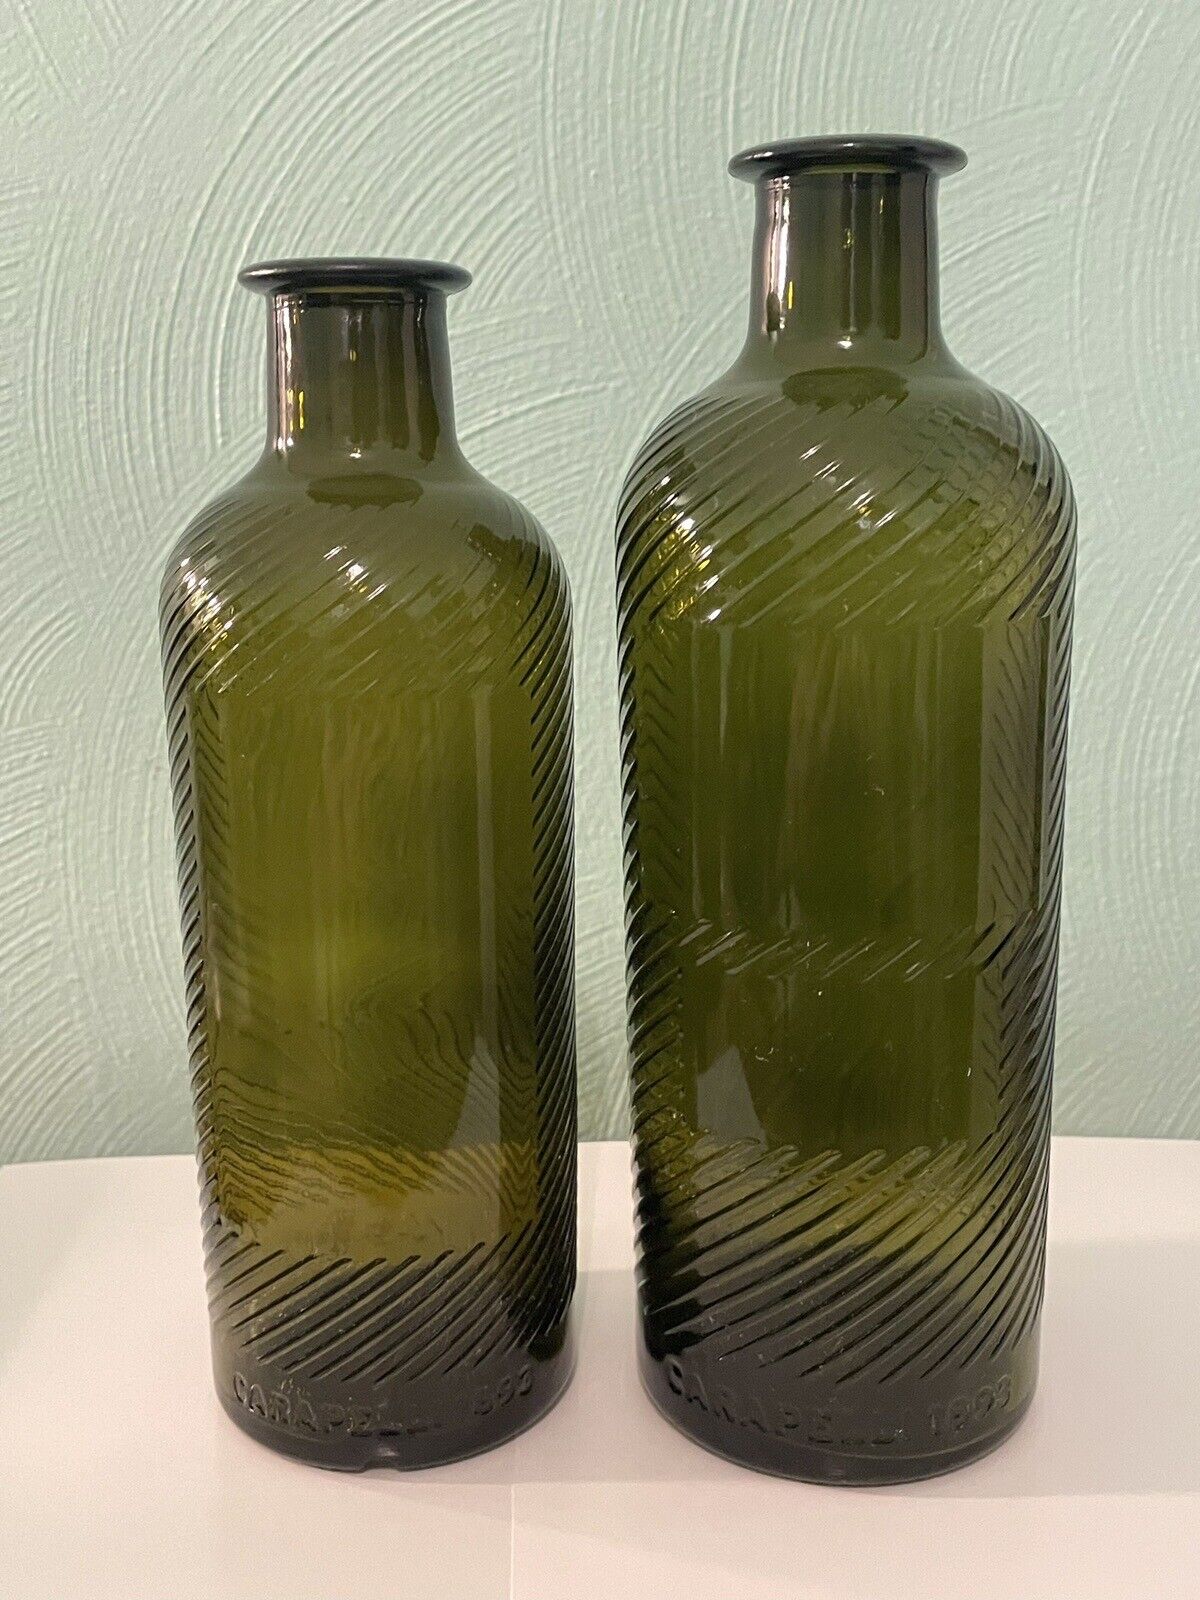 Two Decorative CARAPELLI 1893 Olive Oil Bottles 75cl And 100cl (Empty and Clean)